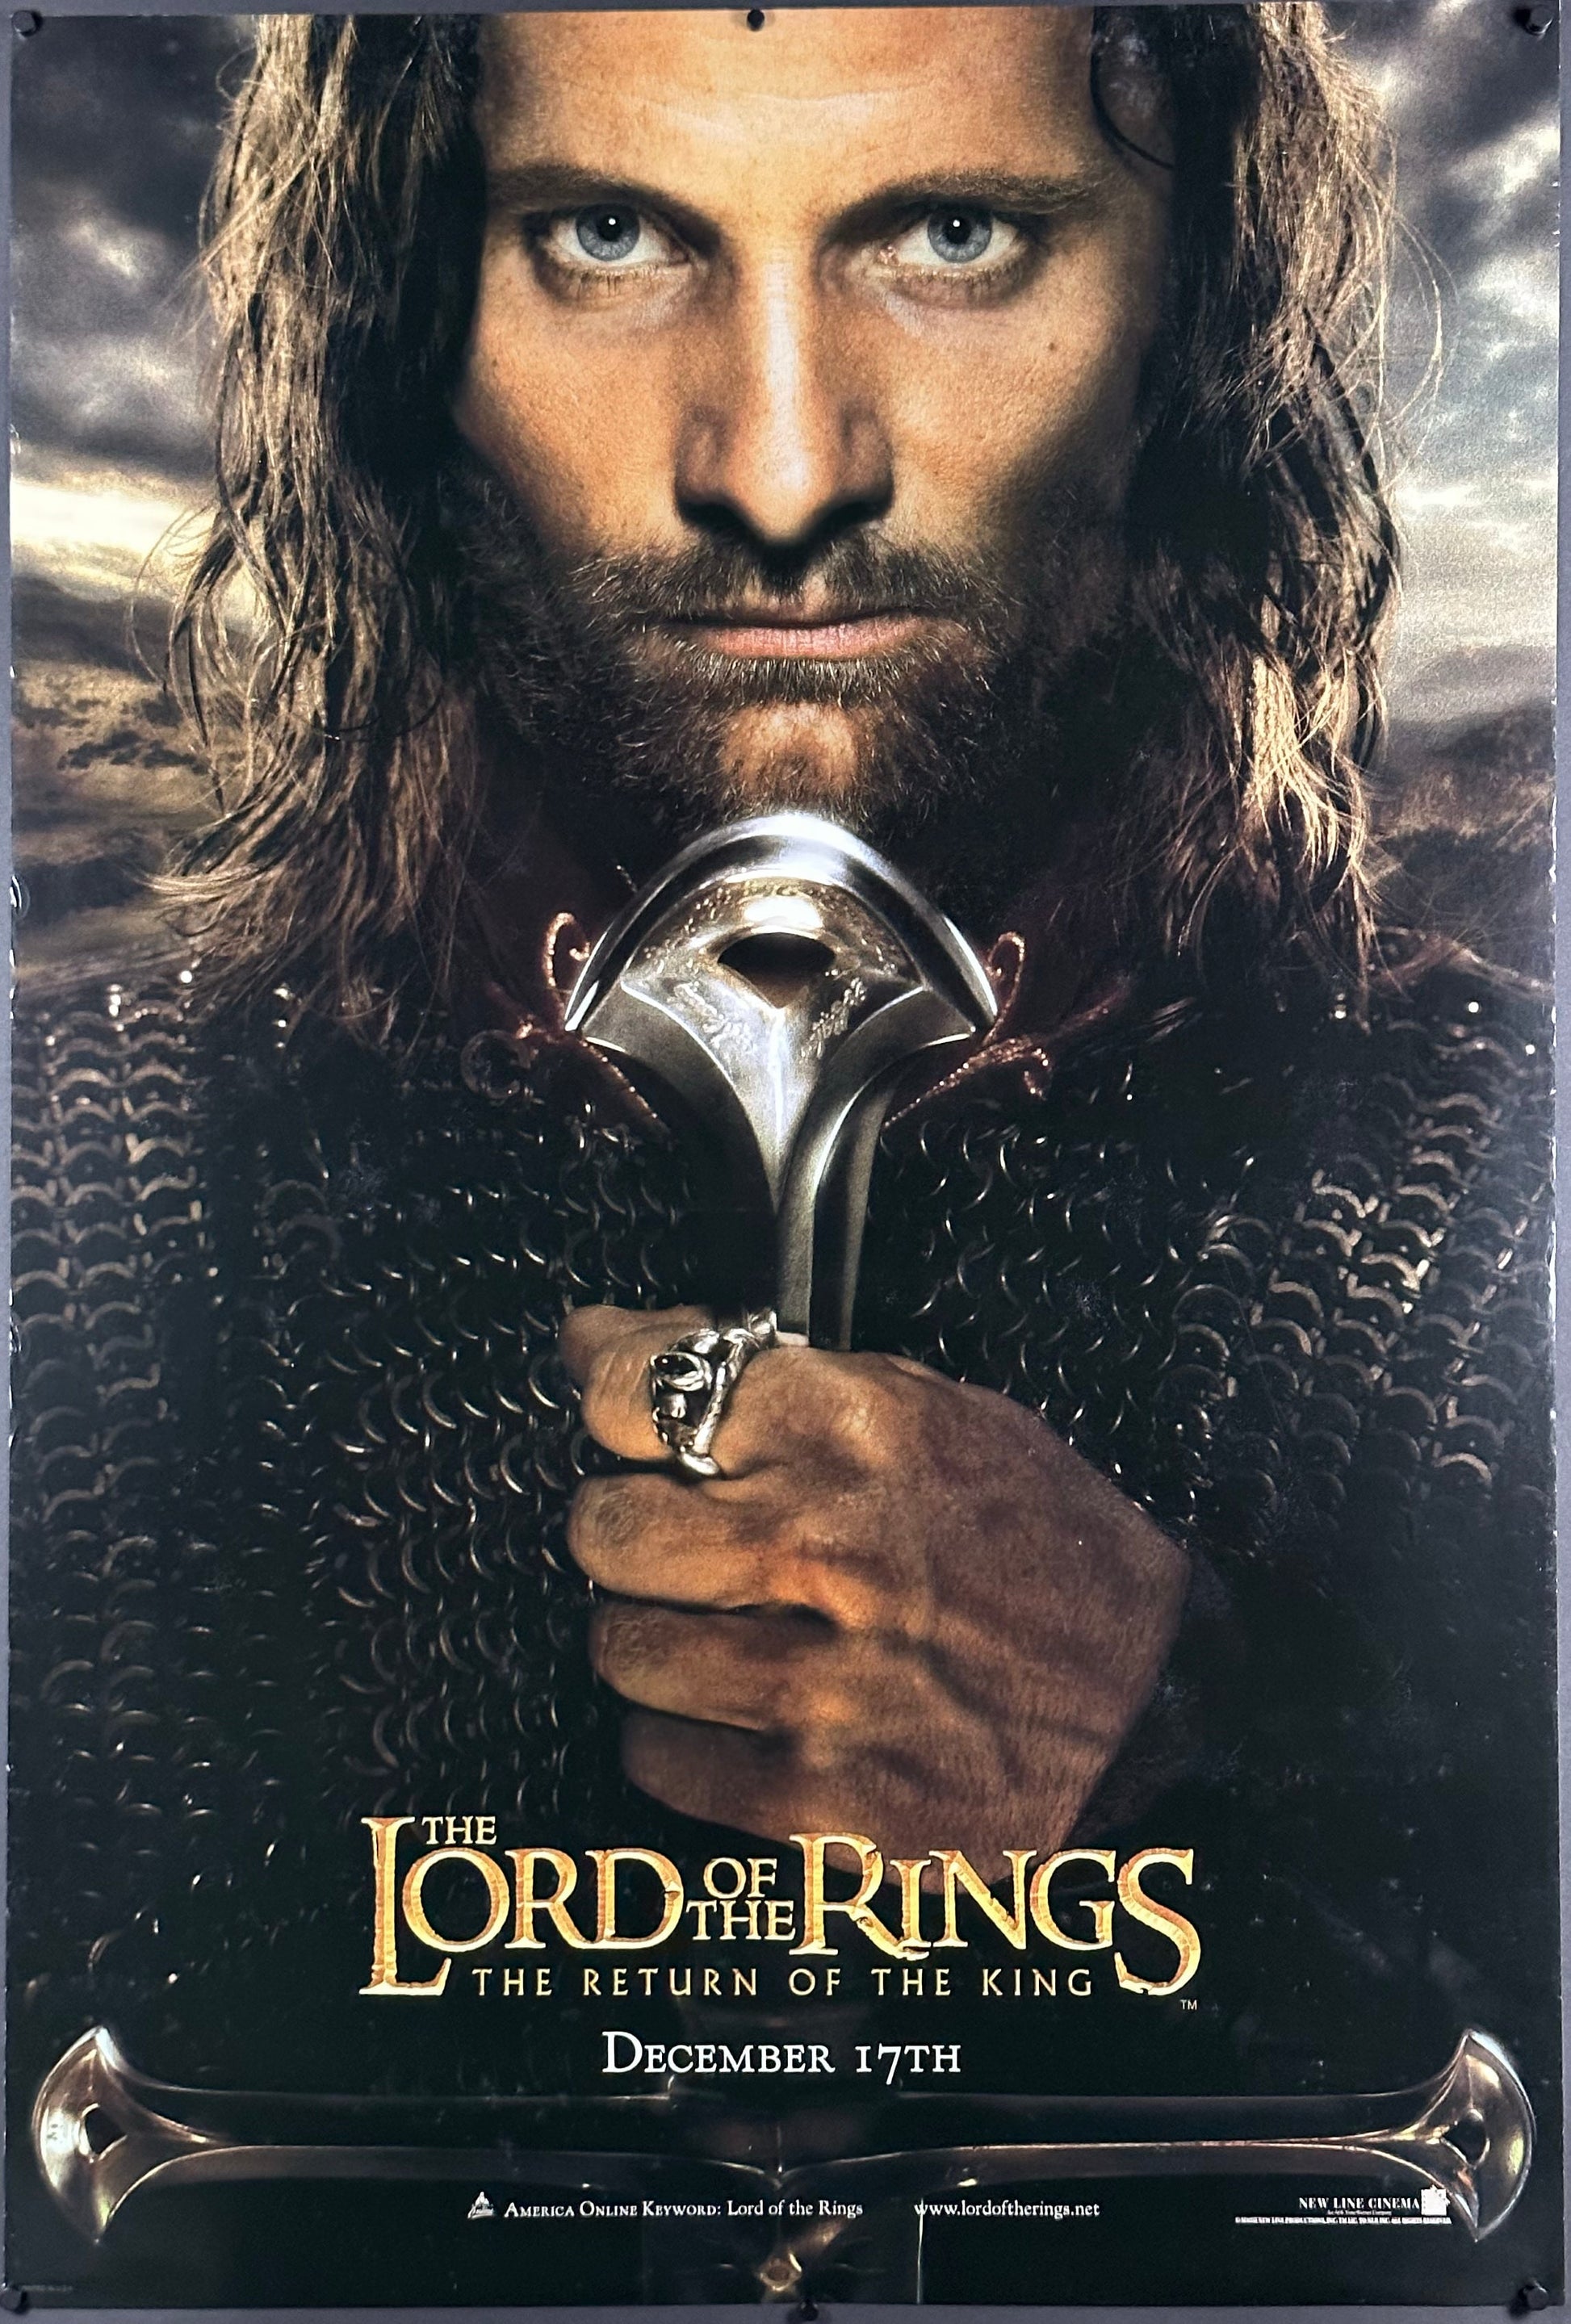 The Lord Of The Rings: The Return Of The King US One Sheet Aragorn Style (2003) - ORIGINAL RELEASE - posterpalace.com